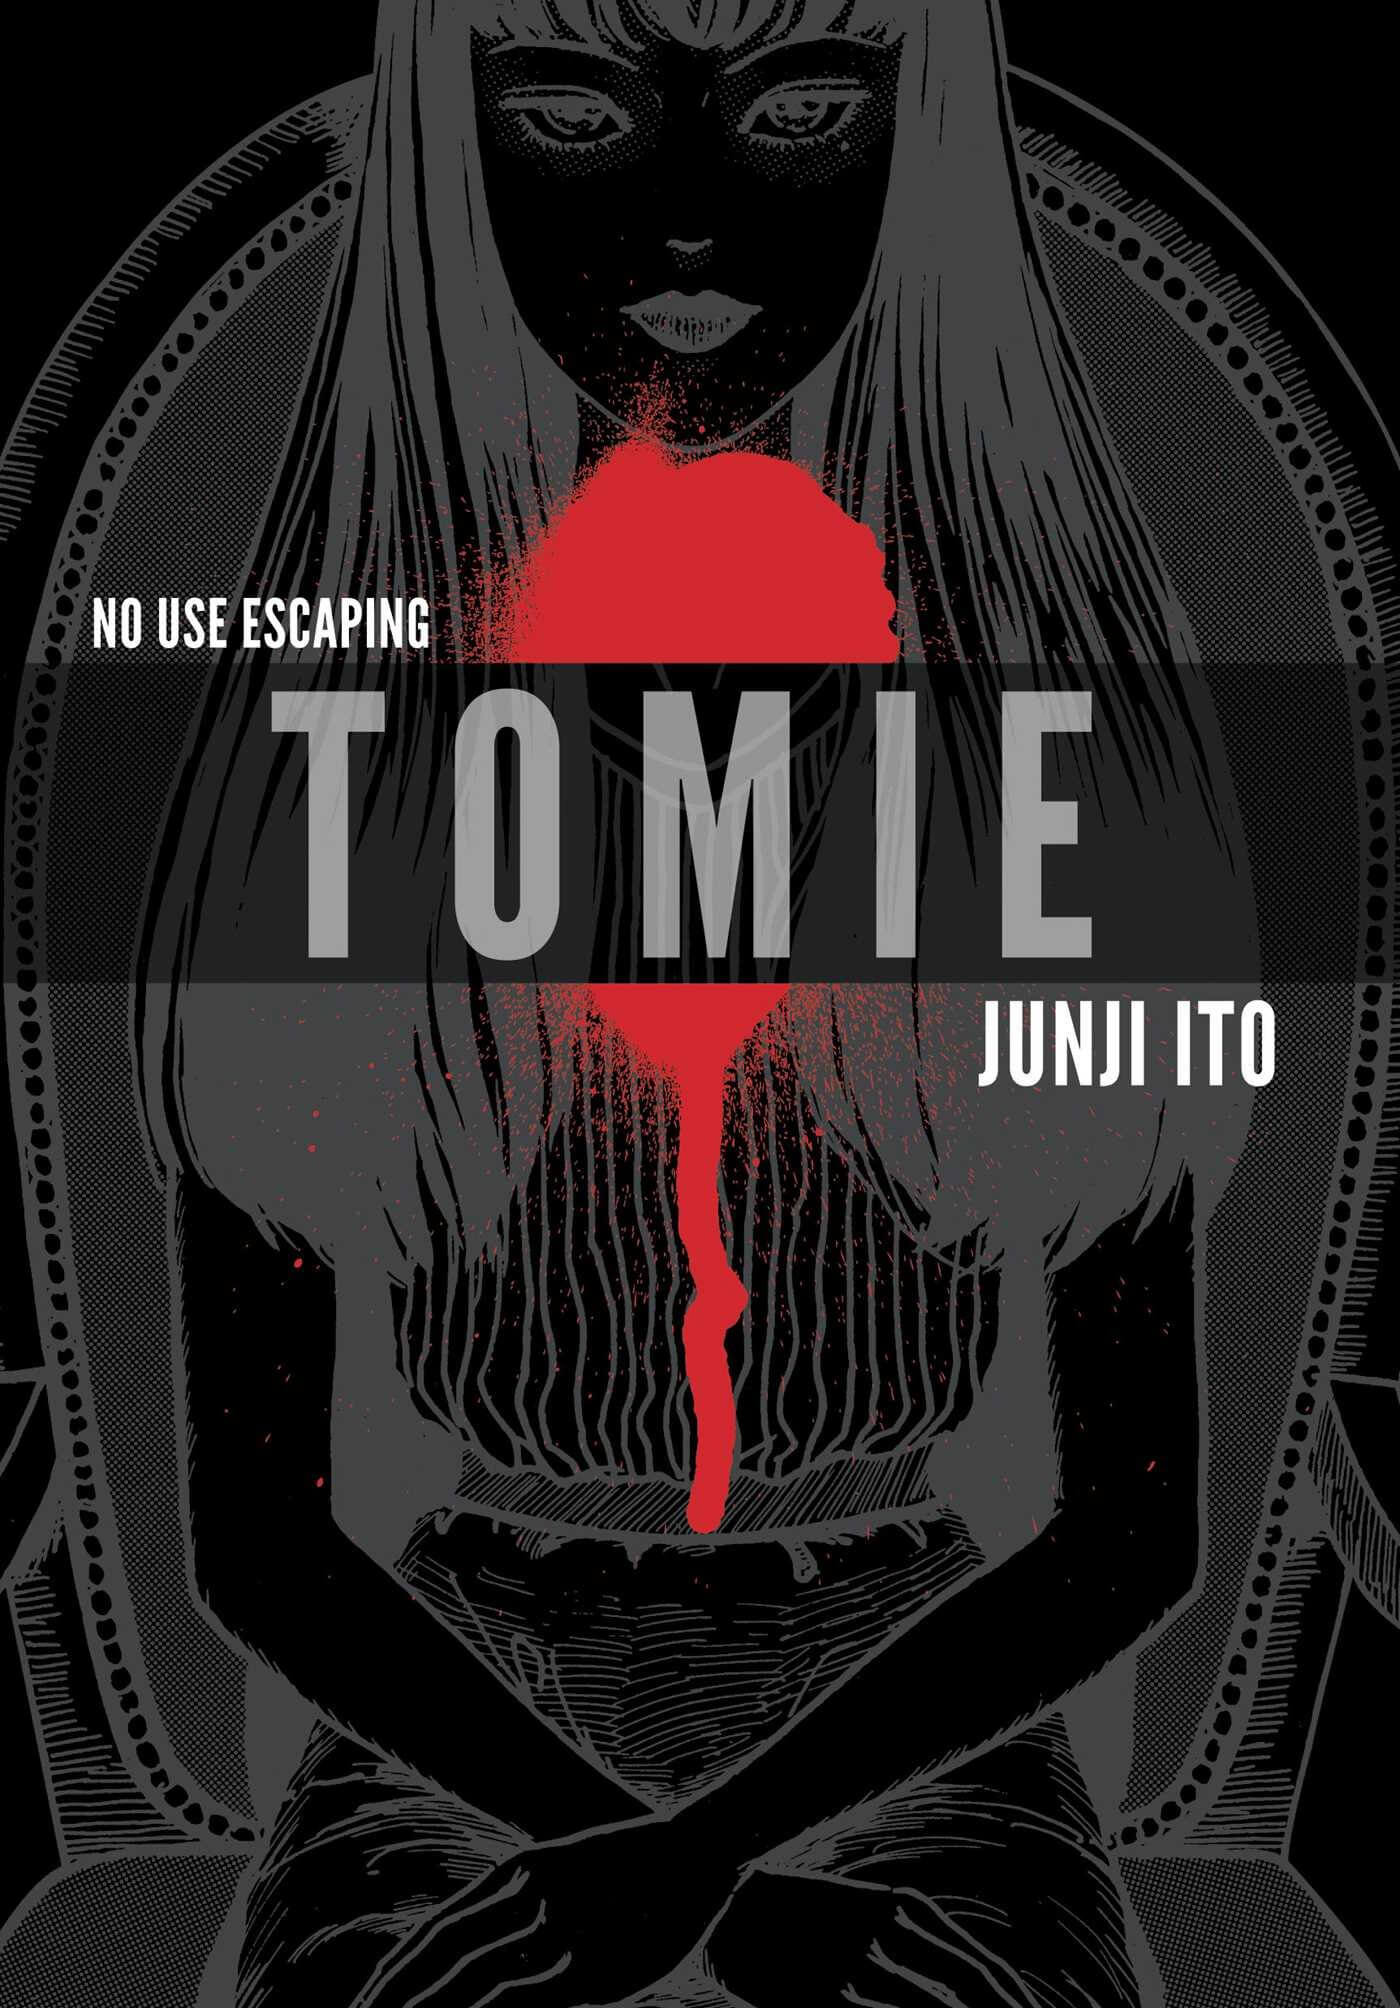 Cover of the Tomie omnibus manga